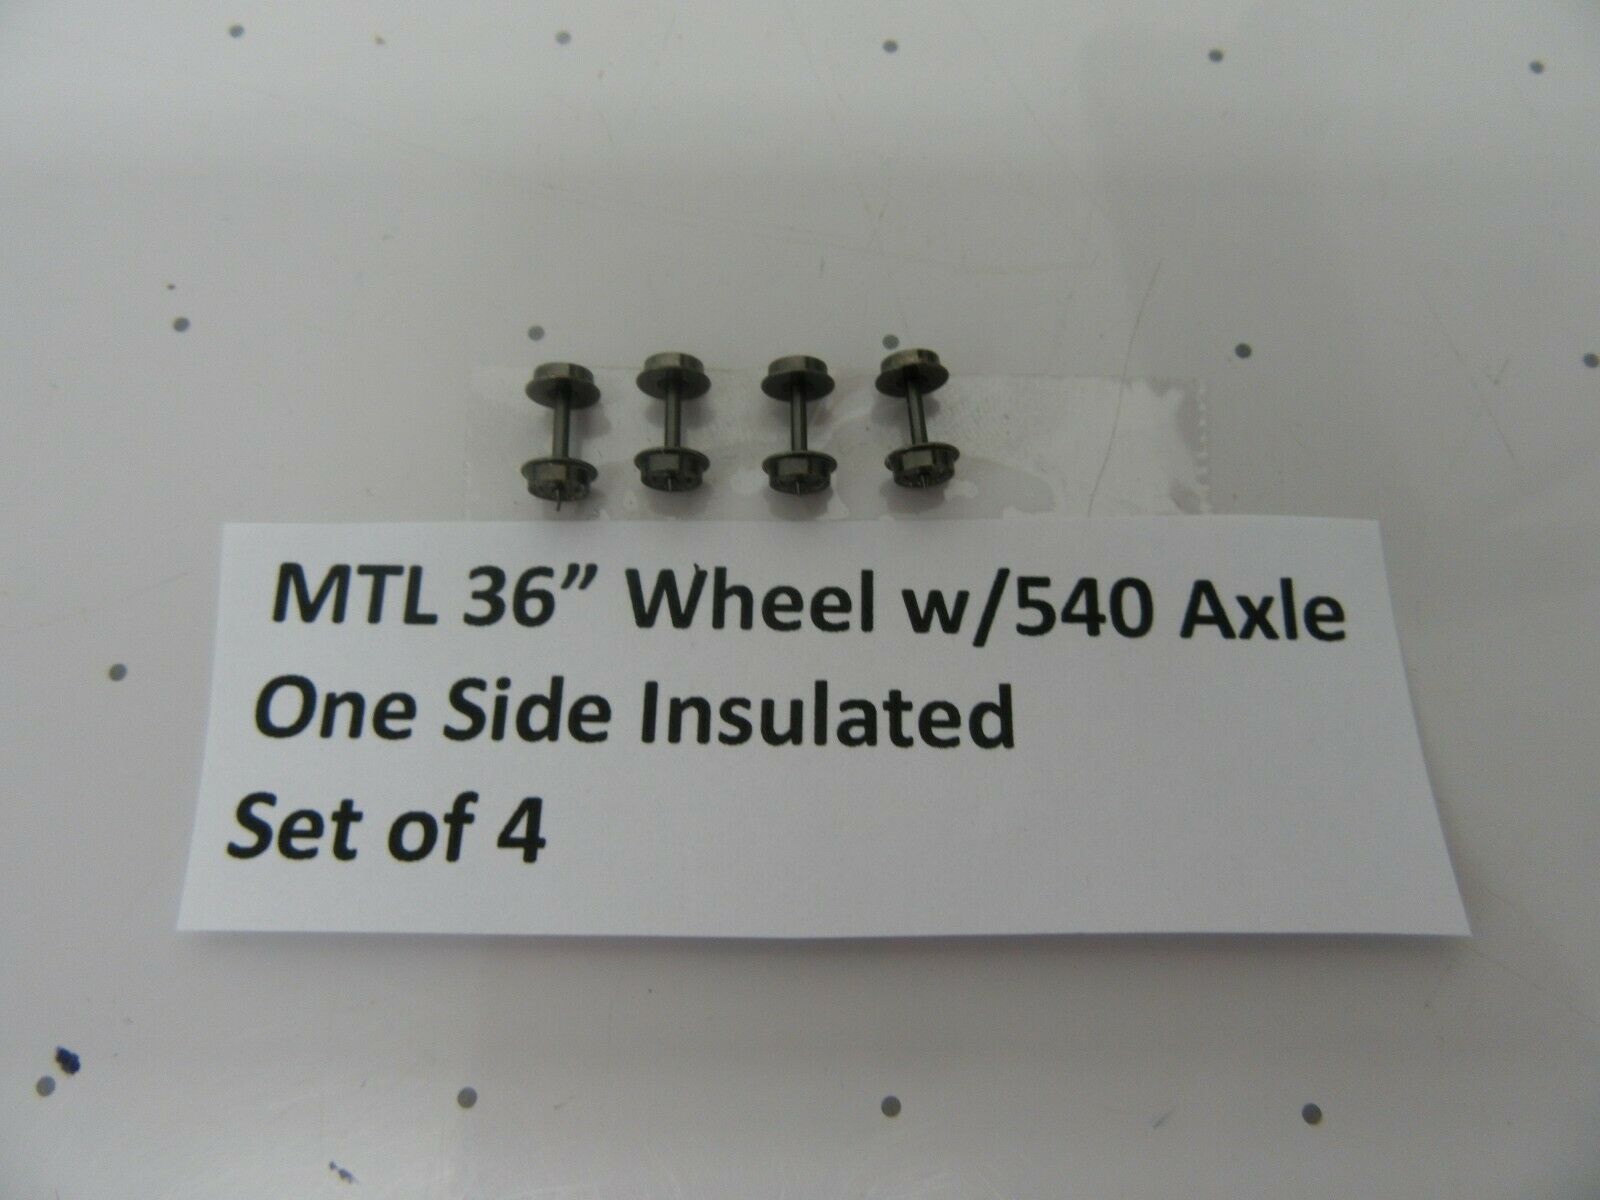 Mtl 36” Wheel W/540 Axle - One Side Insulated (set Of 4) - New